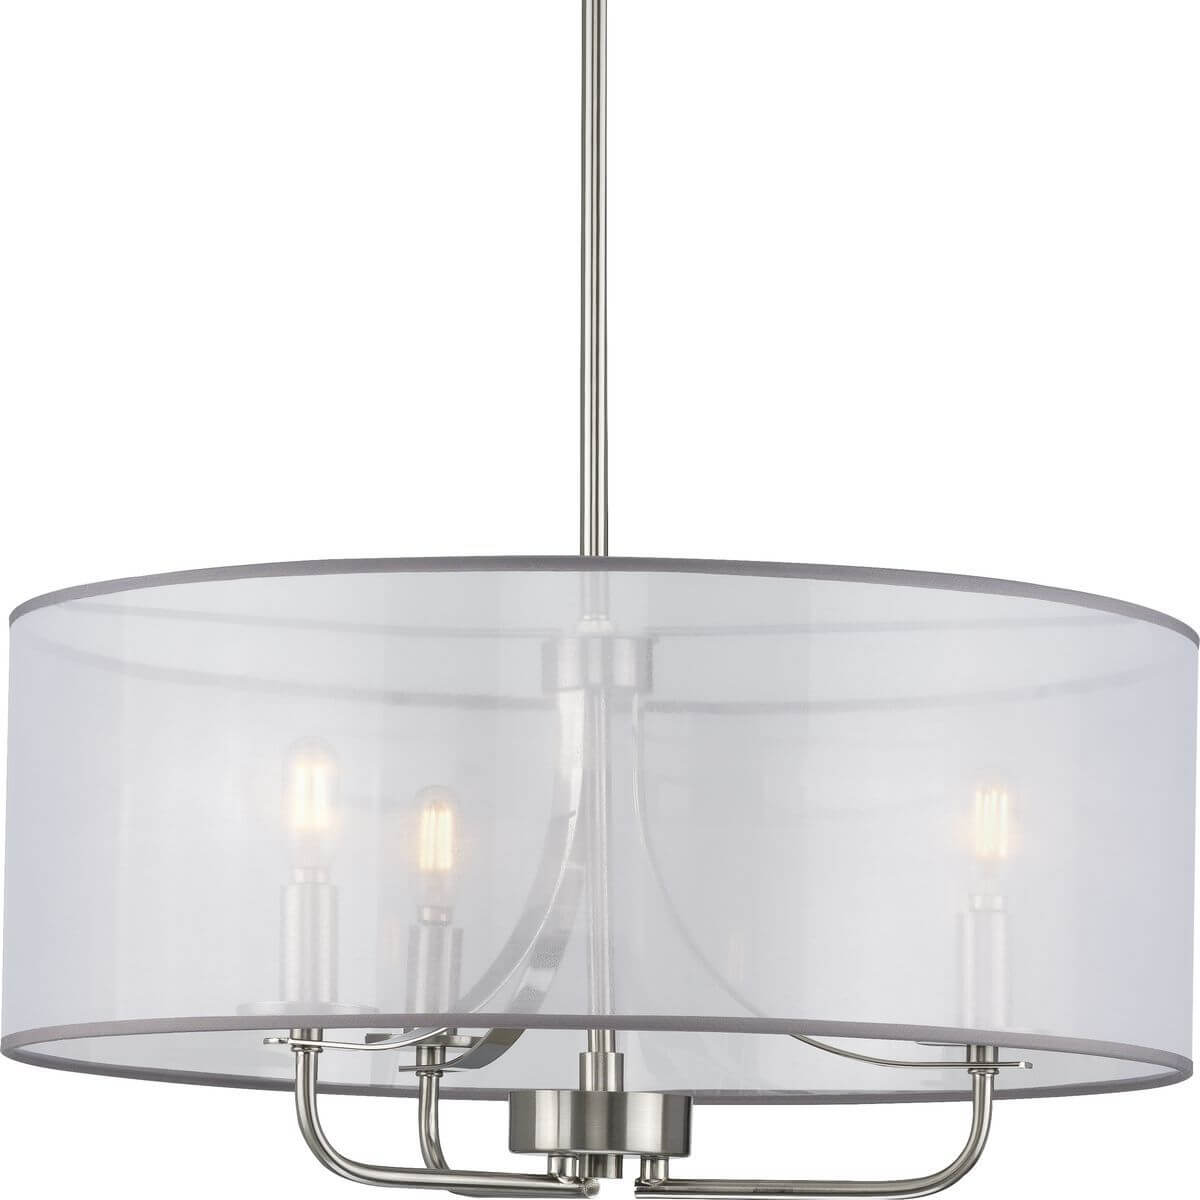 Progress Lighting Riley 3 Light 21 inch Pendant in Brushed Nickel with Organza Drum Shade P500243-009